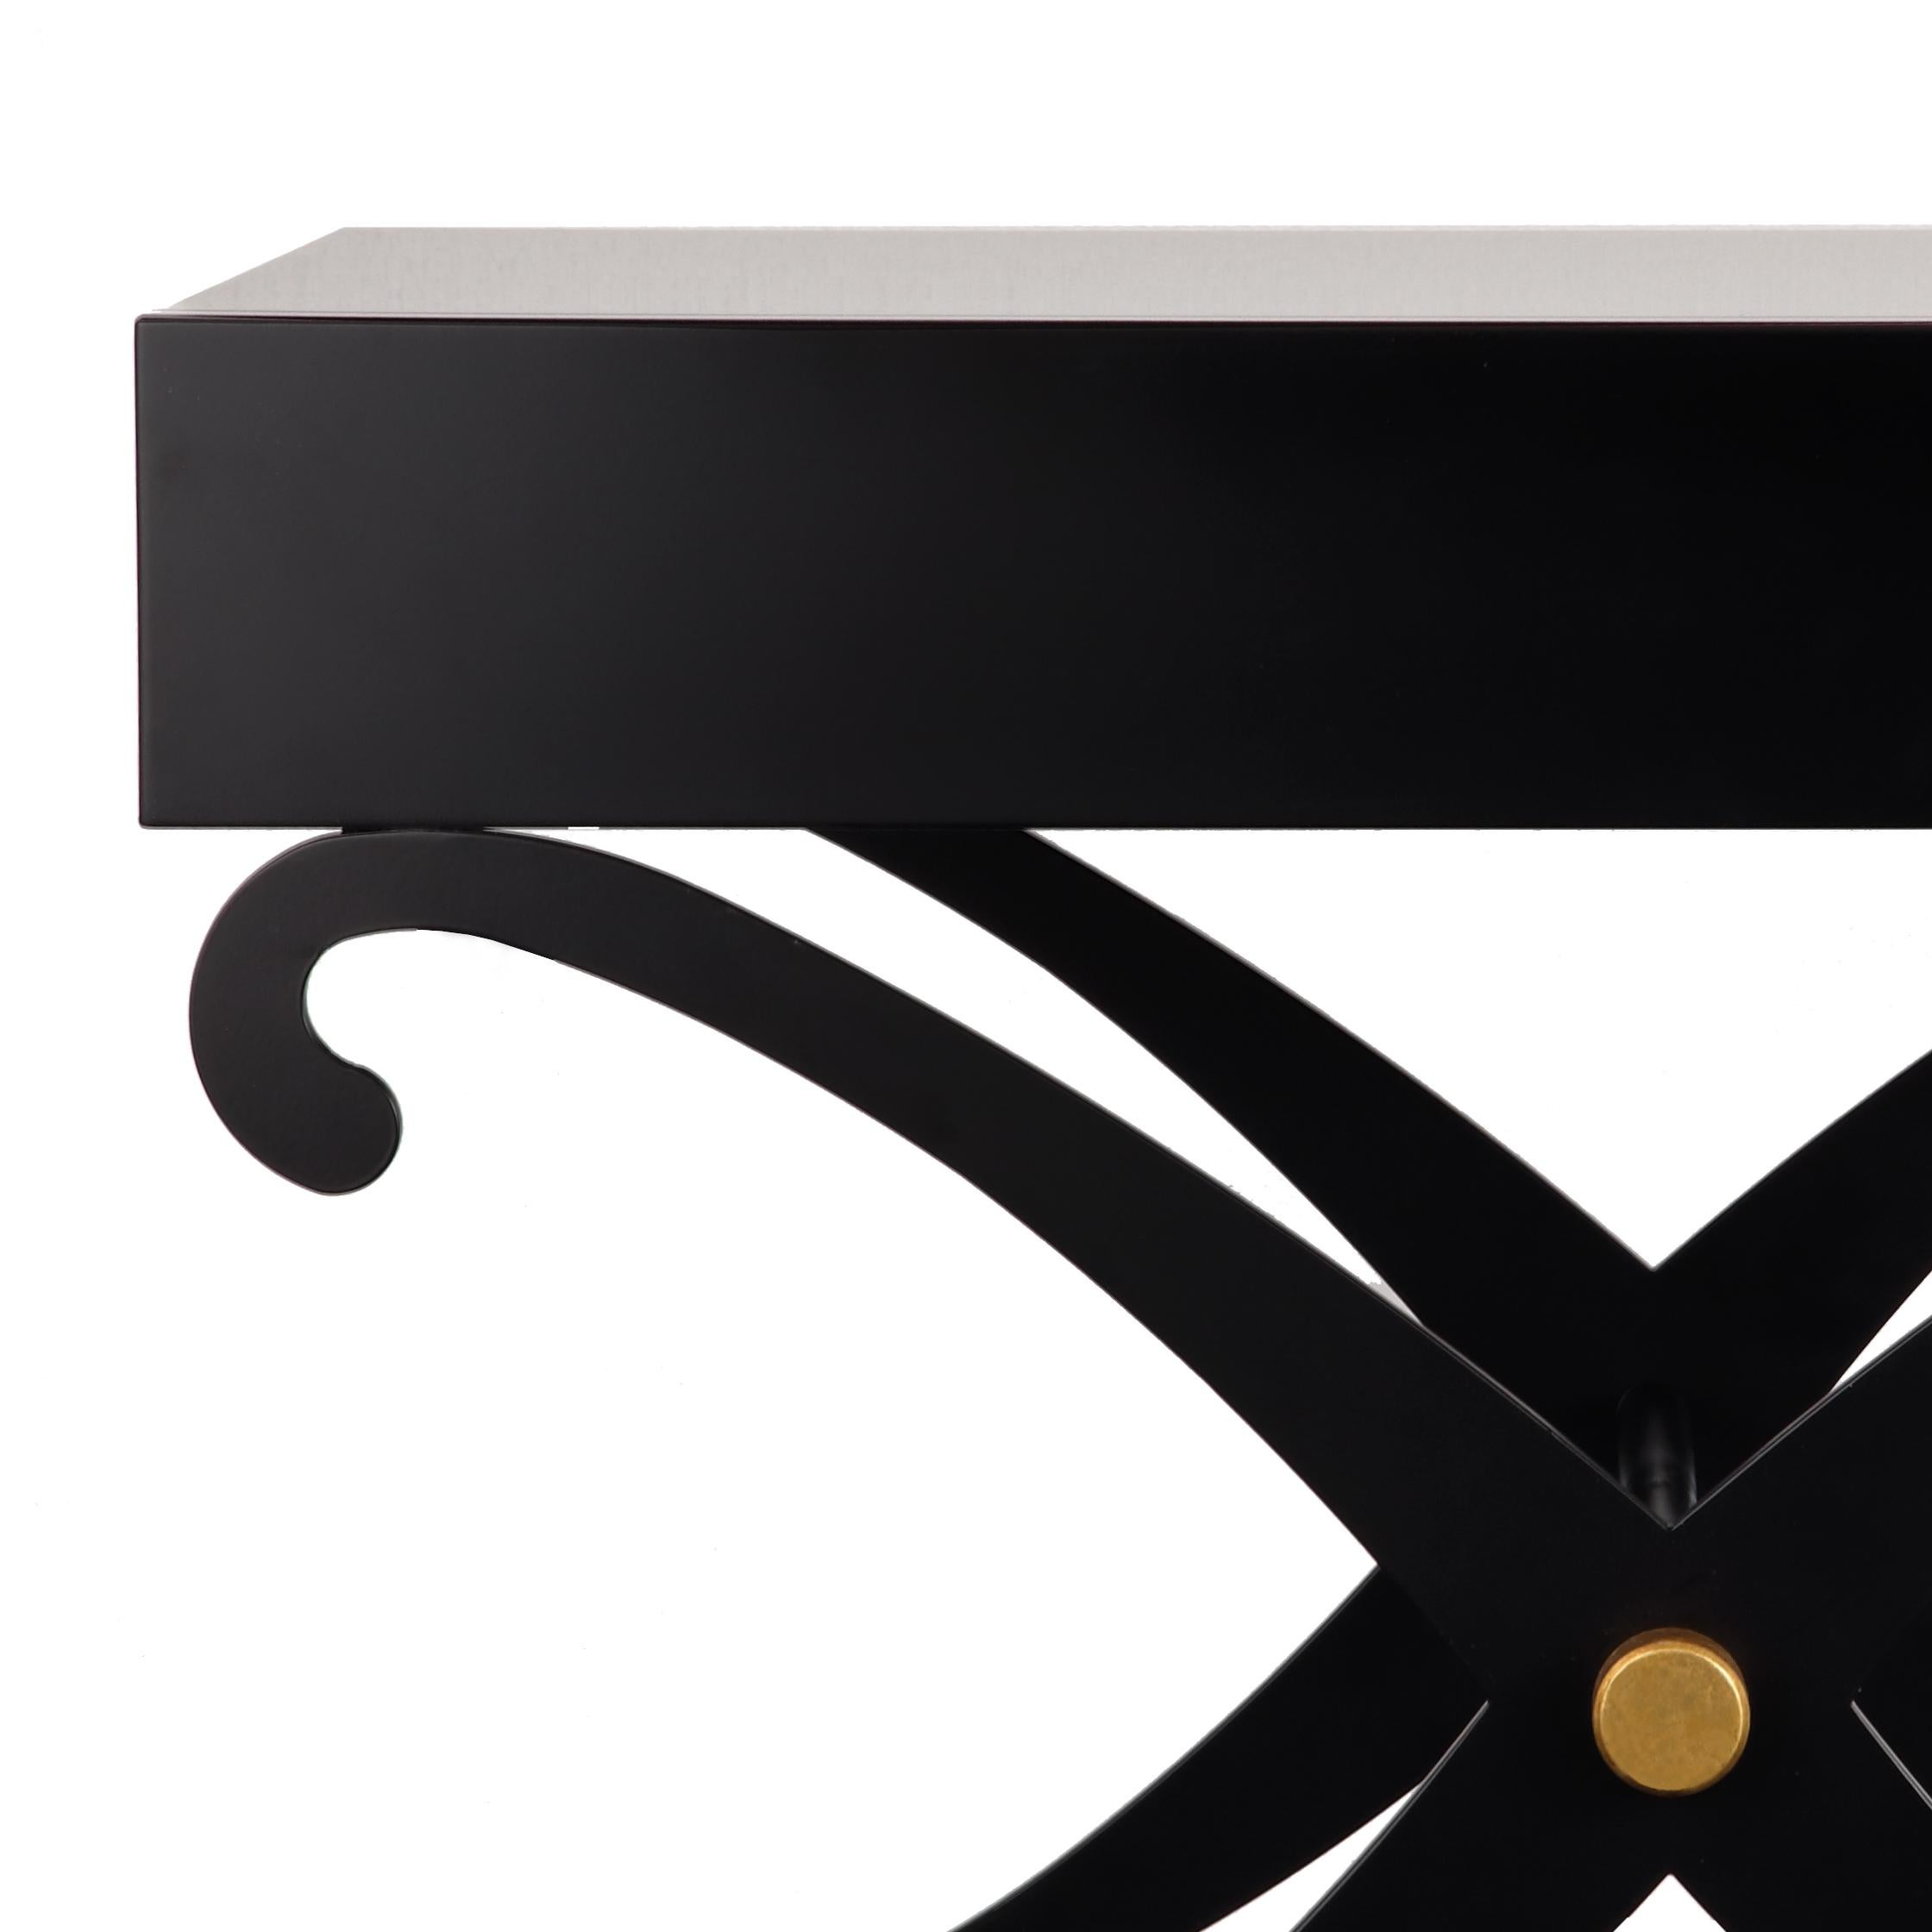 Designed by IC and realized by skilled Italian artisans, the top of the side table is crafted entirely in wood and lays on a curving cross-leg base with gold leaf detail. It is of exemplary quality and can be used either as nightstand or side